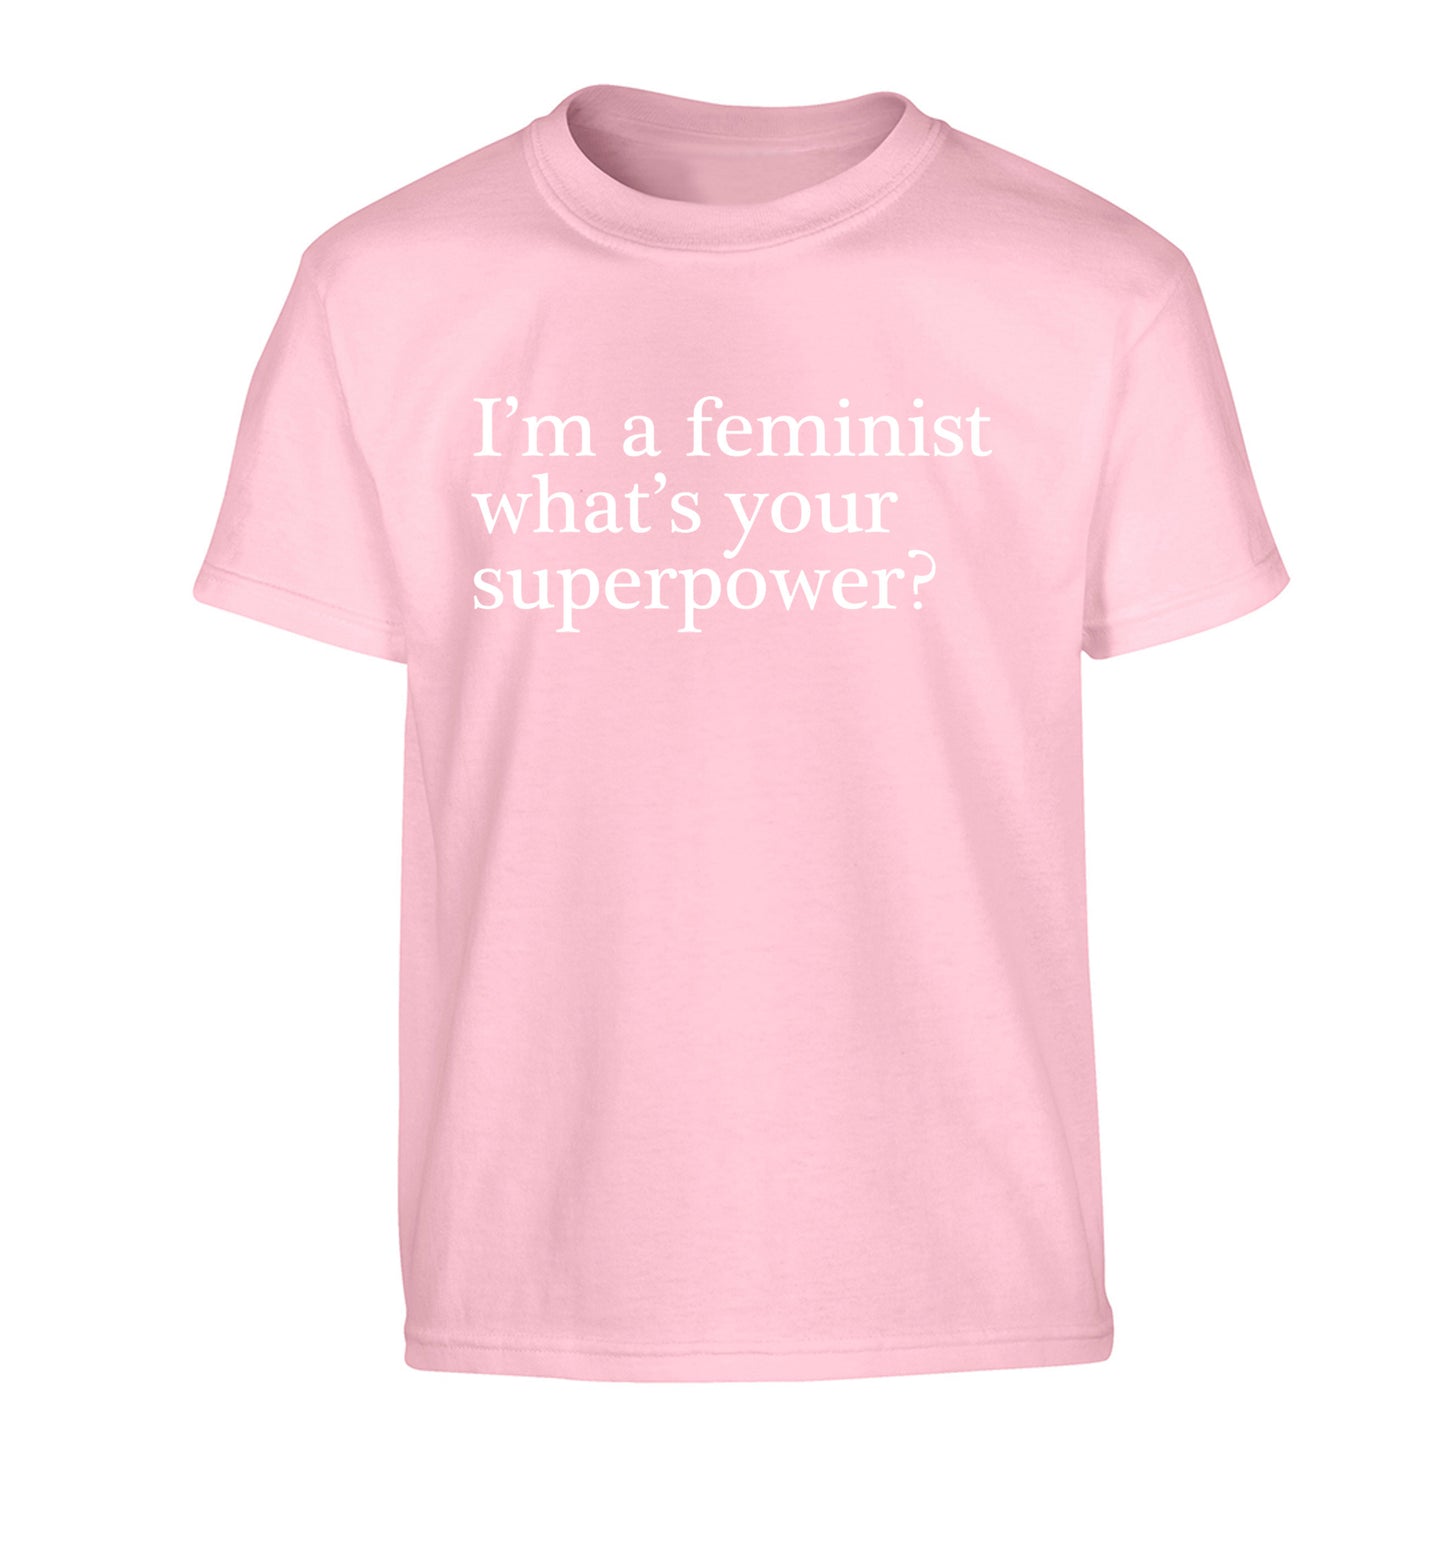 I'm a feminist what's your superpower? Children's light pink Tshirt 12-14 Years